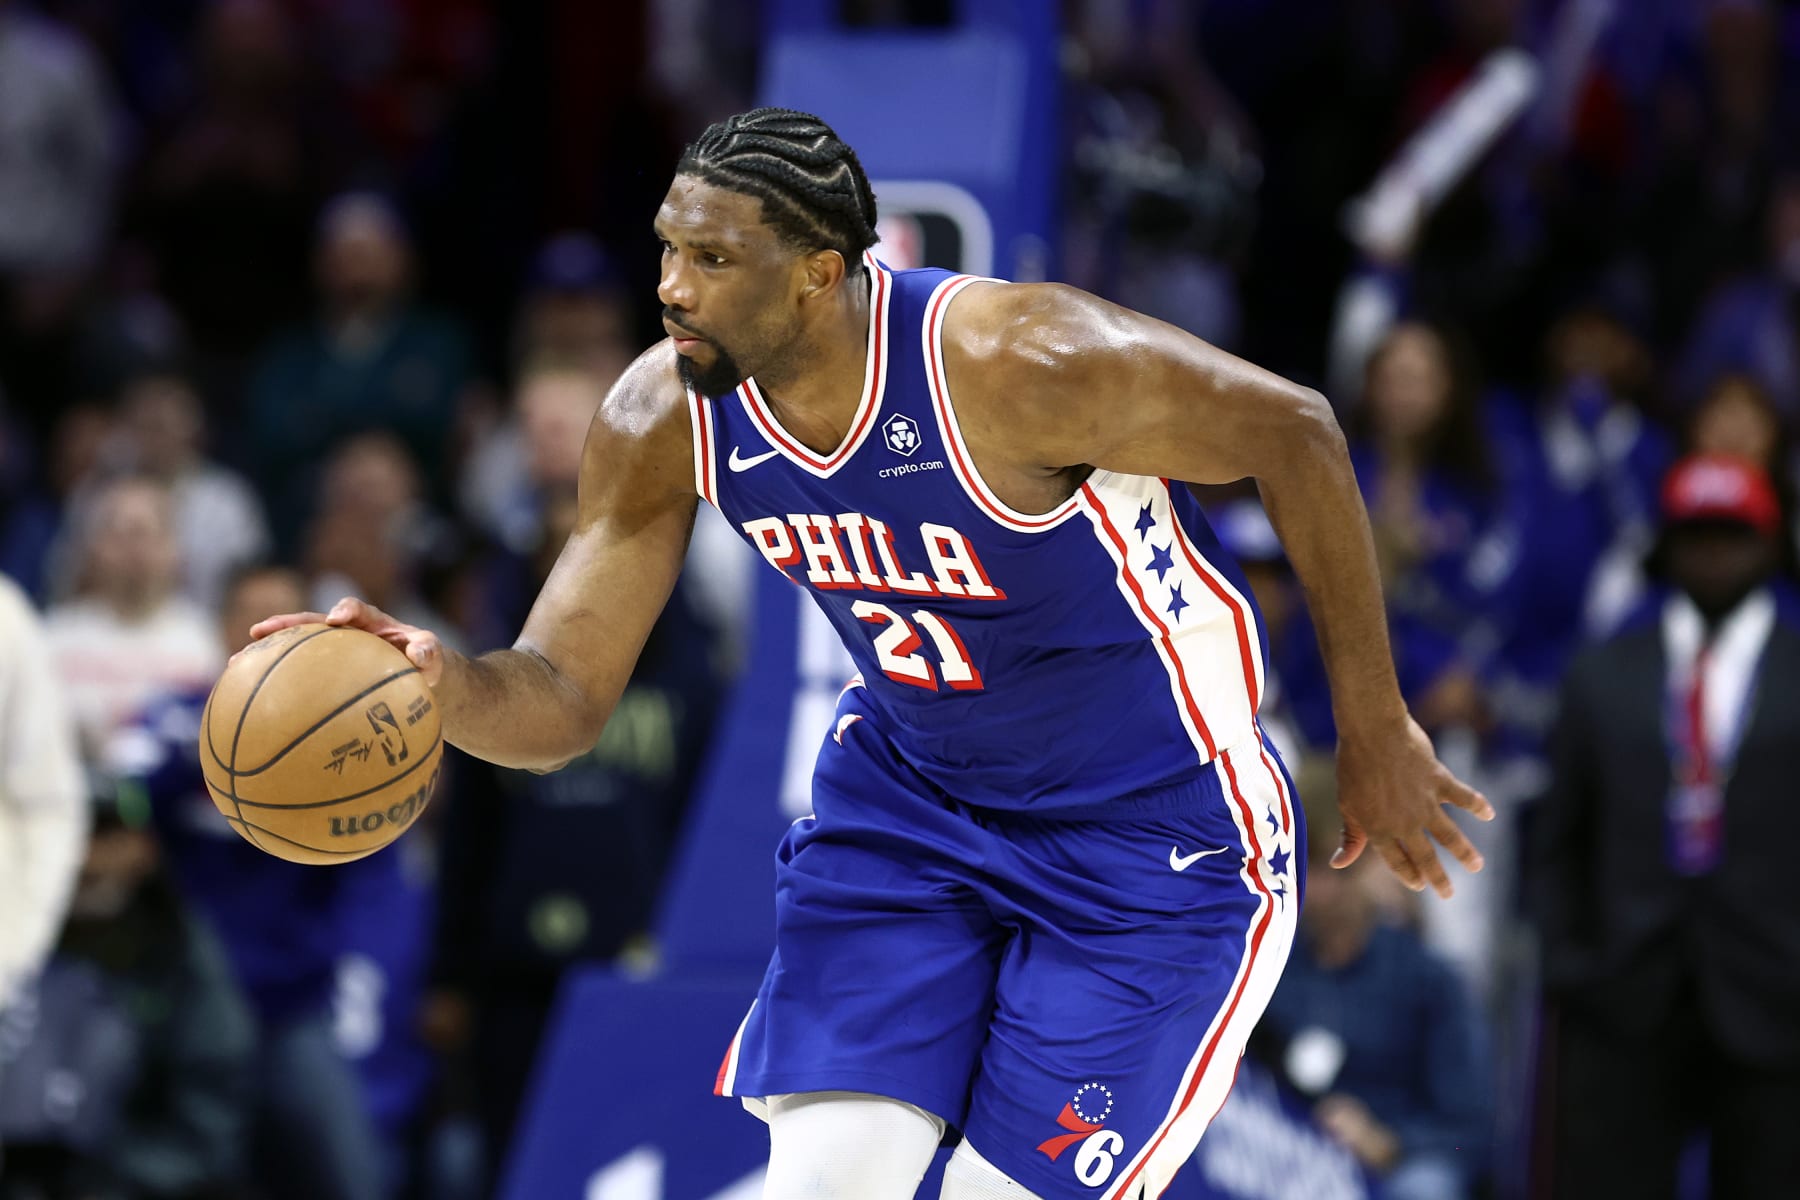 Joel Embiid of the 76ers opens up about how injury affected mental health: ‘It was really tough’